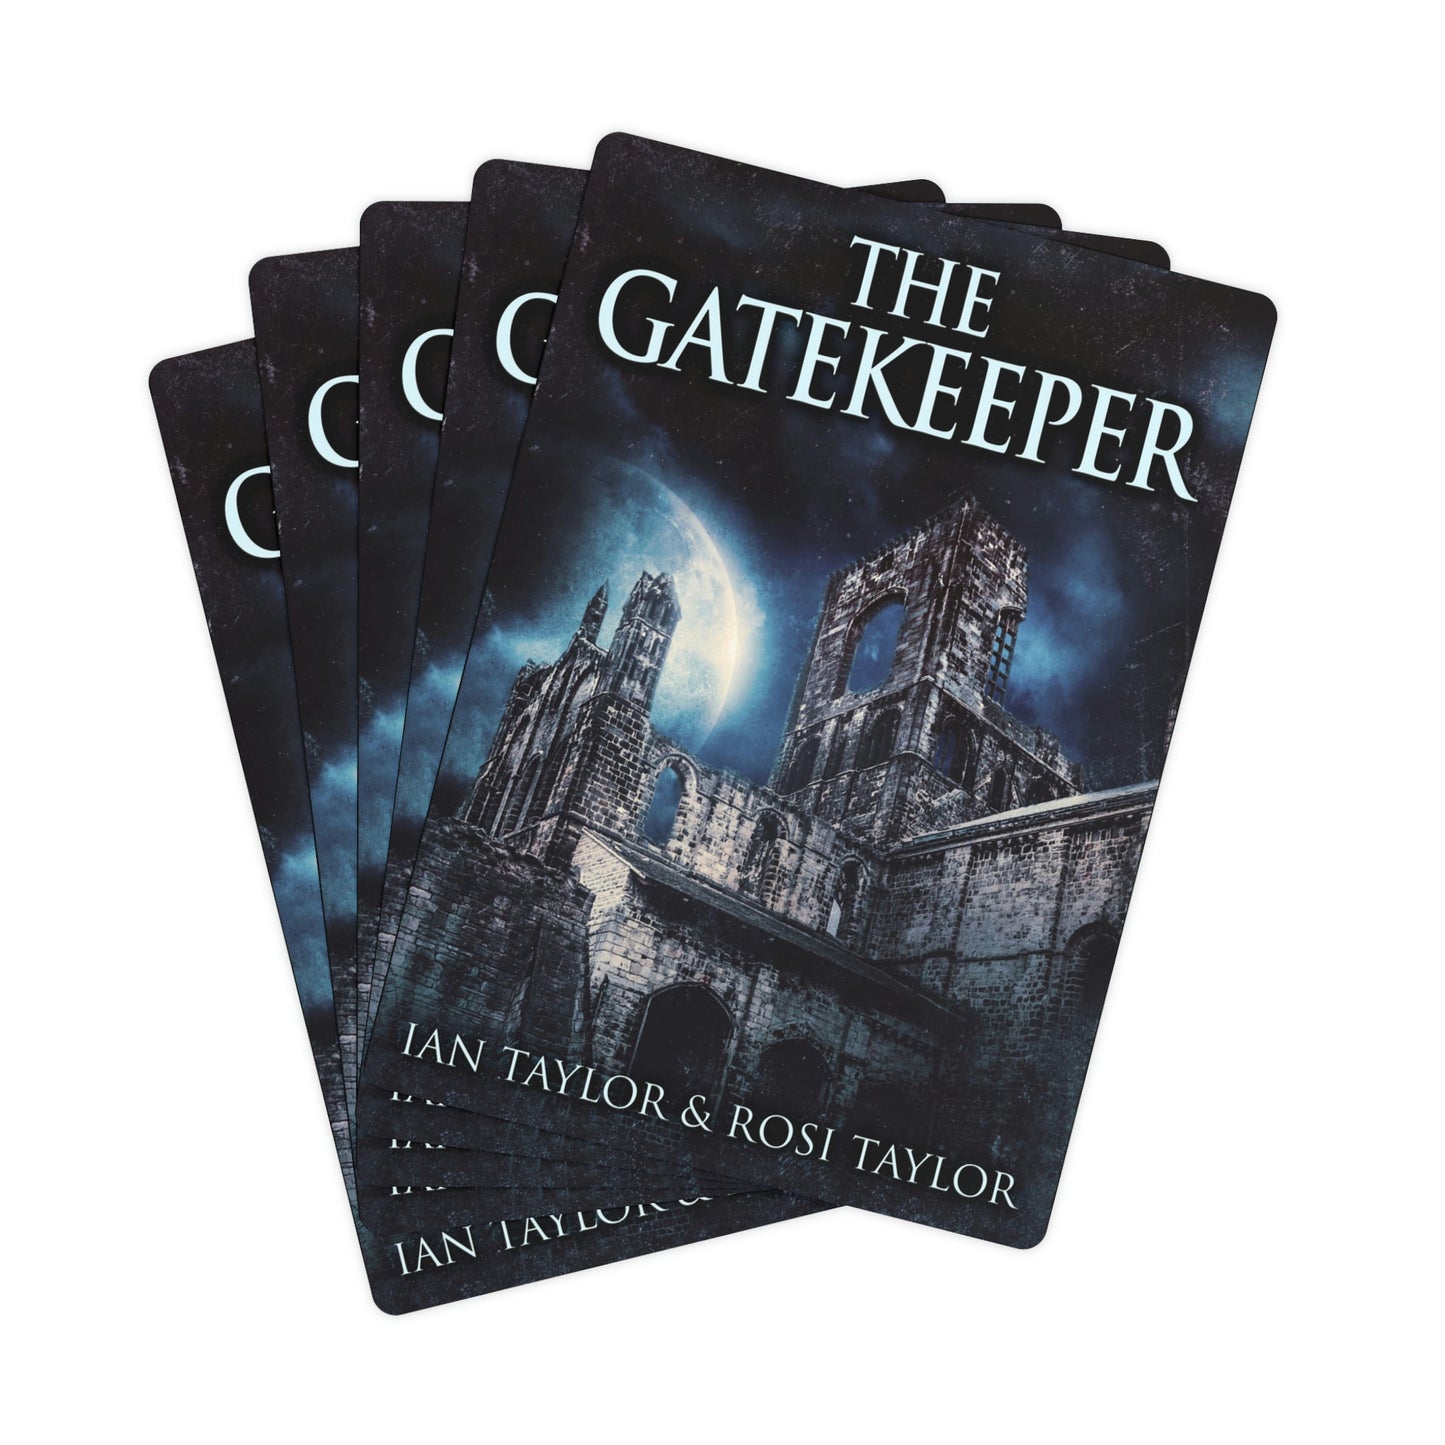 The Gatekeeper - Playing Cards